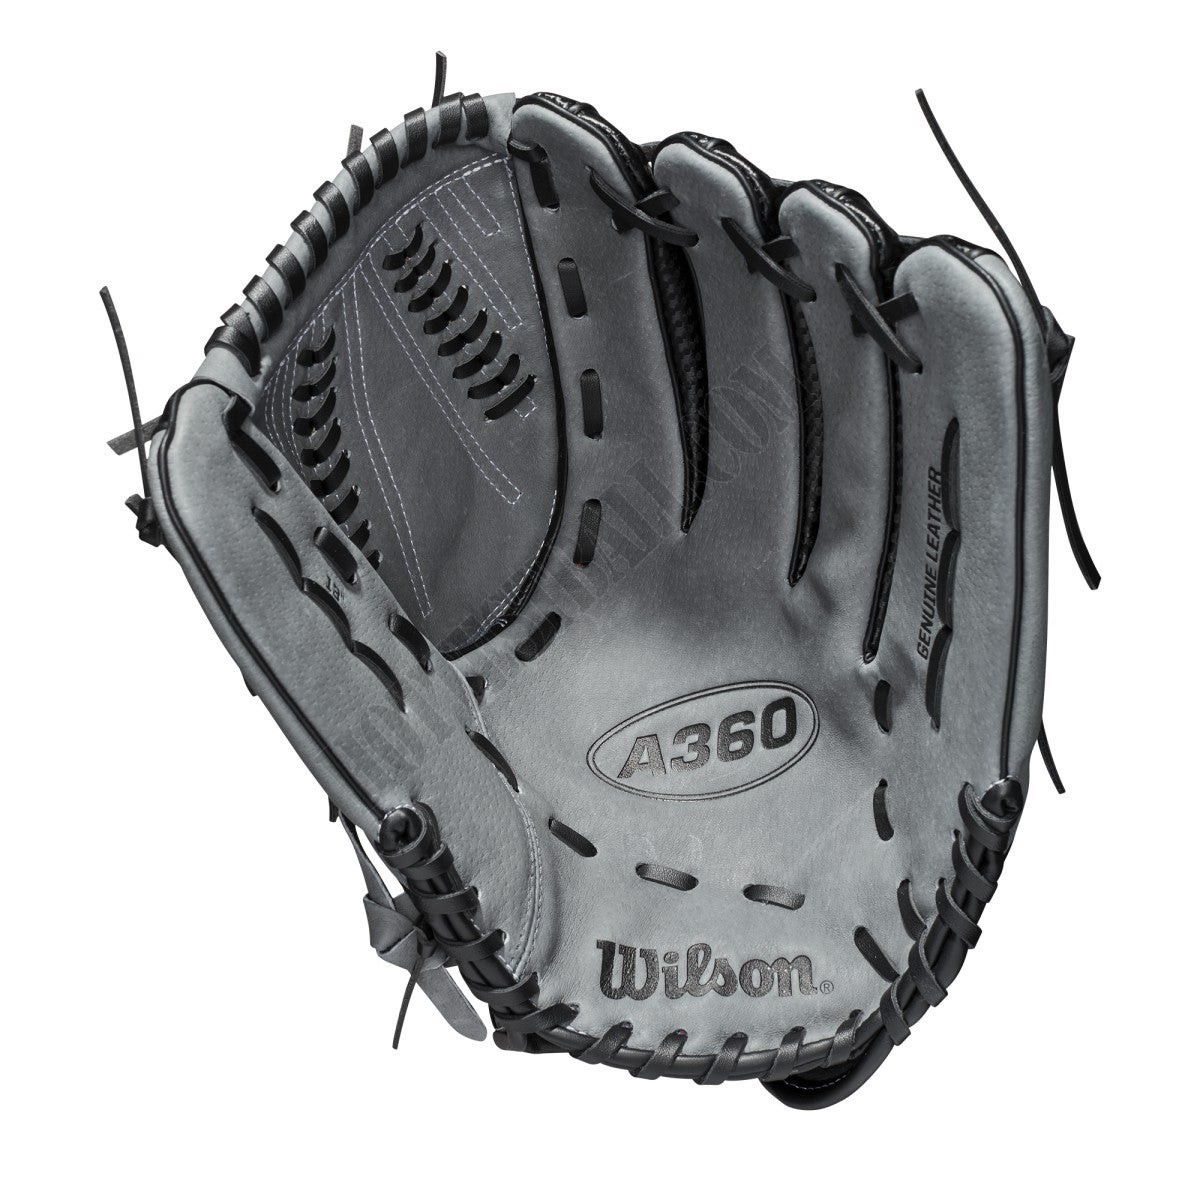 2021 A360 SP13 13" Slowpitch Softball Glove ● Wilson Promotions - -2